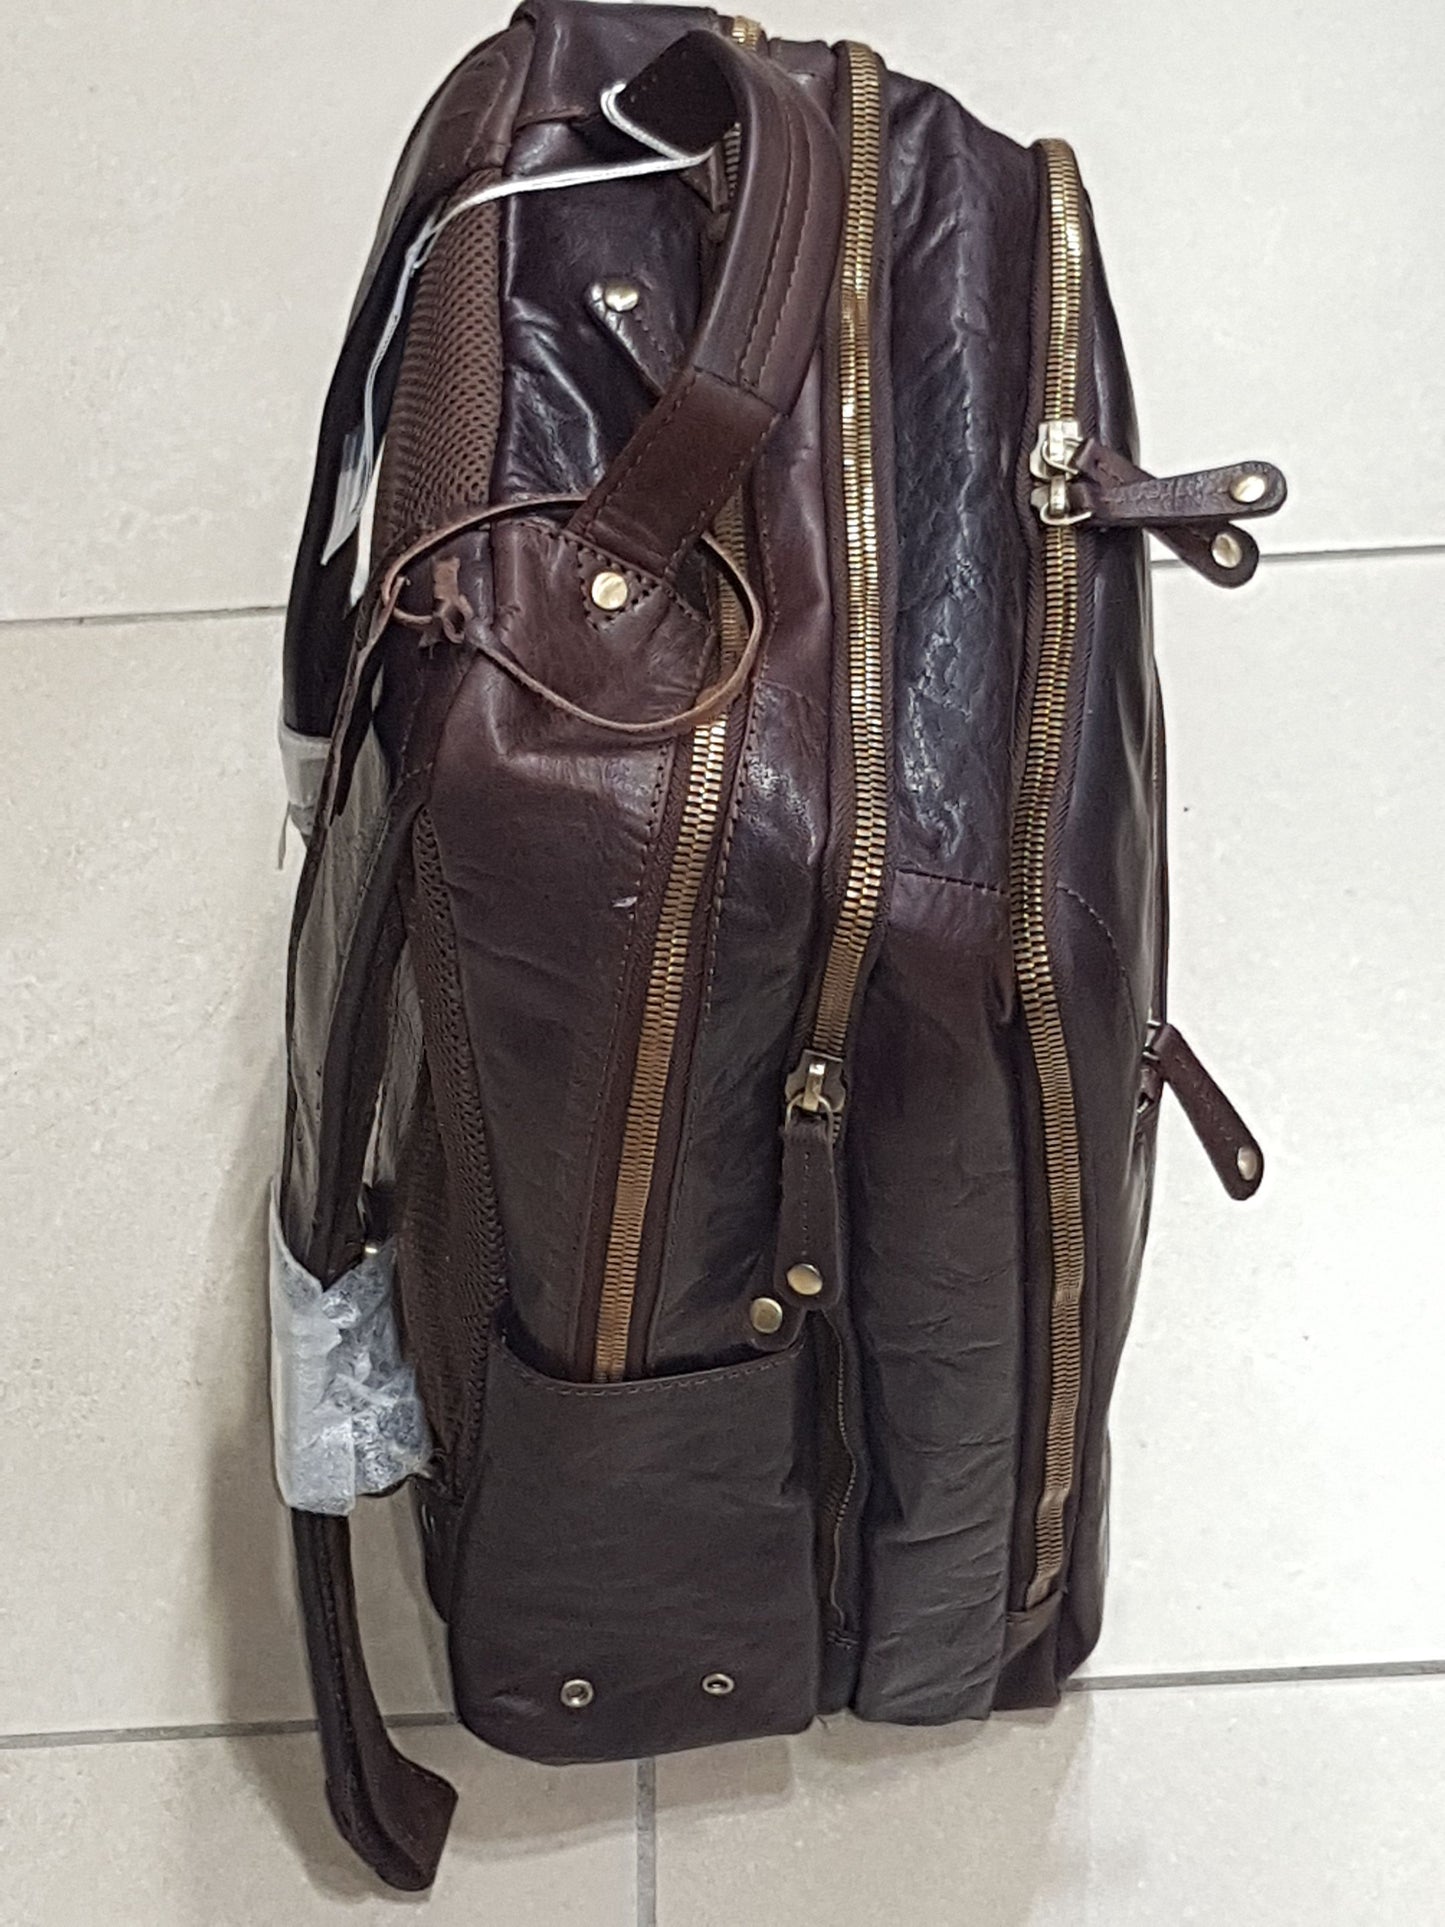 Oran - Mike Large Leather Laptop Backpack